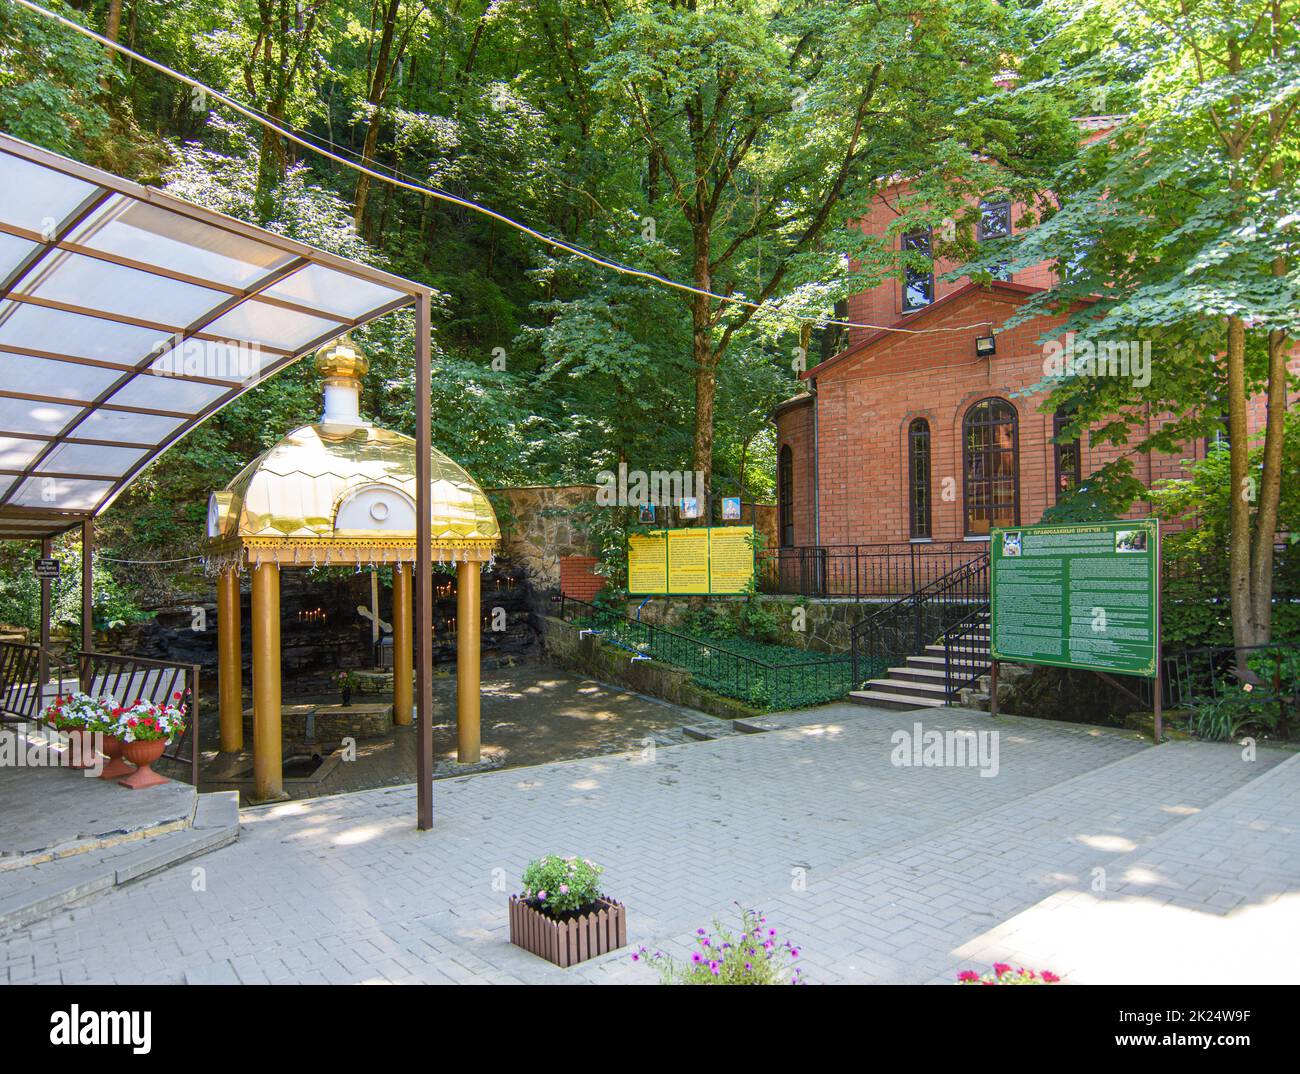 Neberdzhaevskaya, Russia - July 24, 2021: One of the sources of the complex of springs 'Holy handle' in the Krymsky district of the Krasnodar Territor Stock Photo